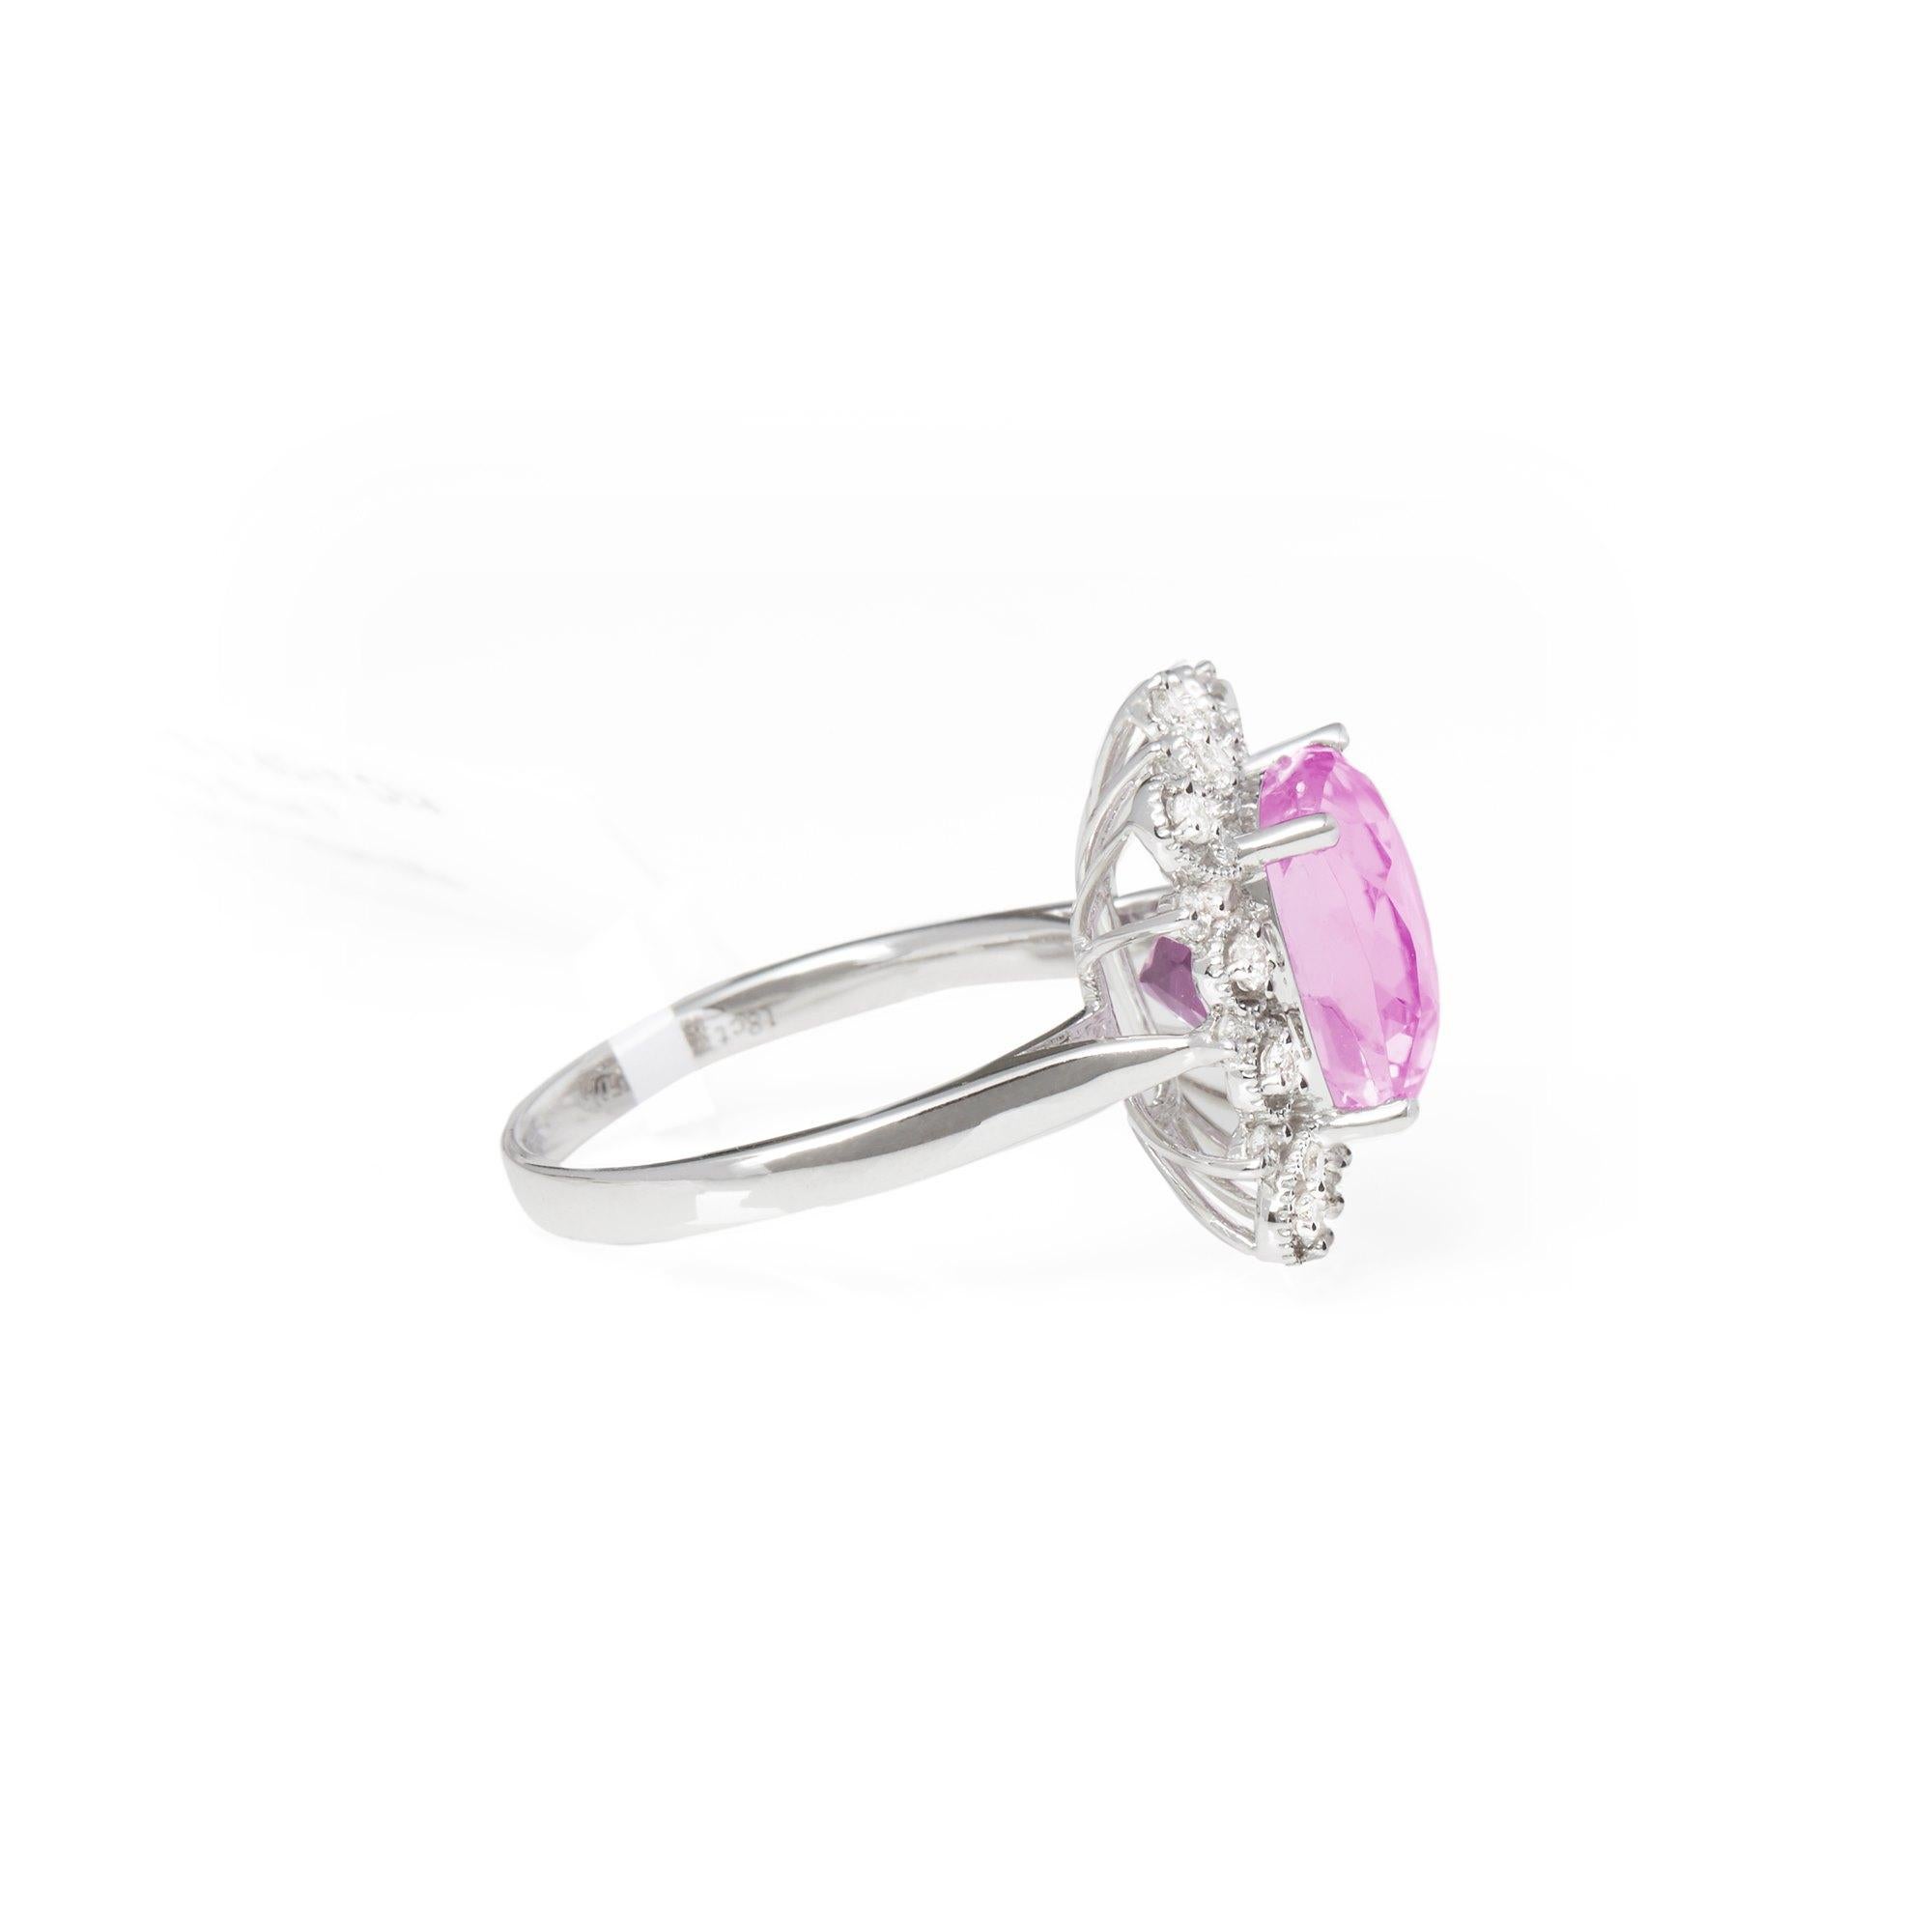 This ring designed by David Jerome is from his private collection and features one cushion cut kunzite totalling 5.91cts sourced in Afghanistan. Set with round brilliant cut Diamonds totalling 0.40cts mounted in an 18k white gold setting. UK finger